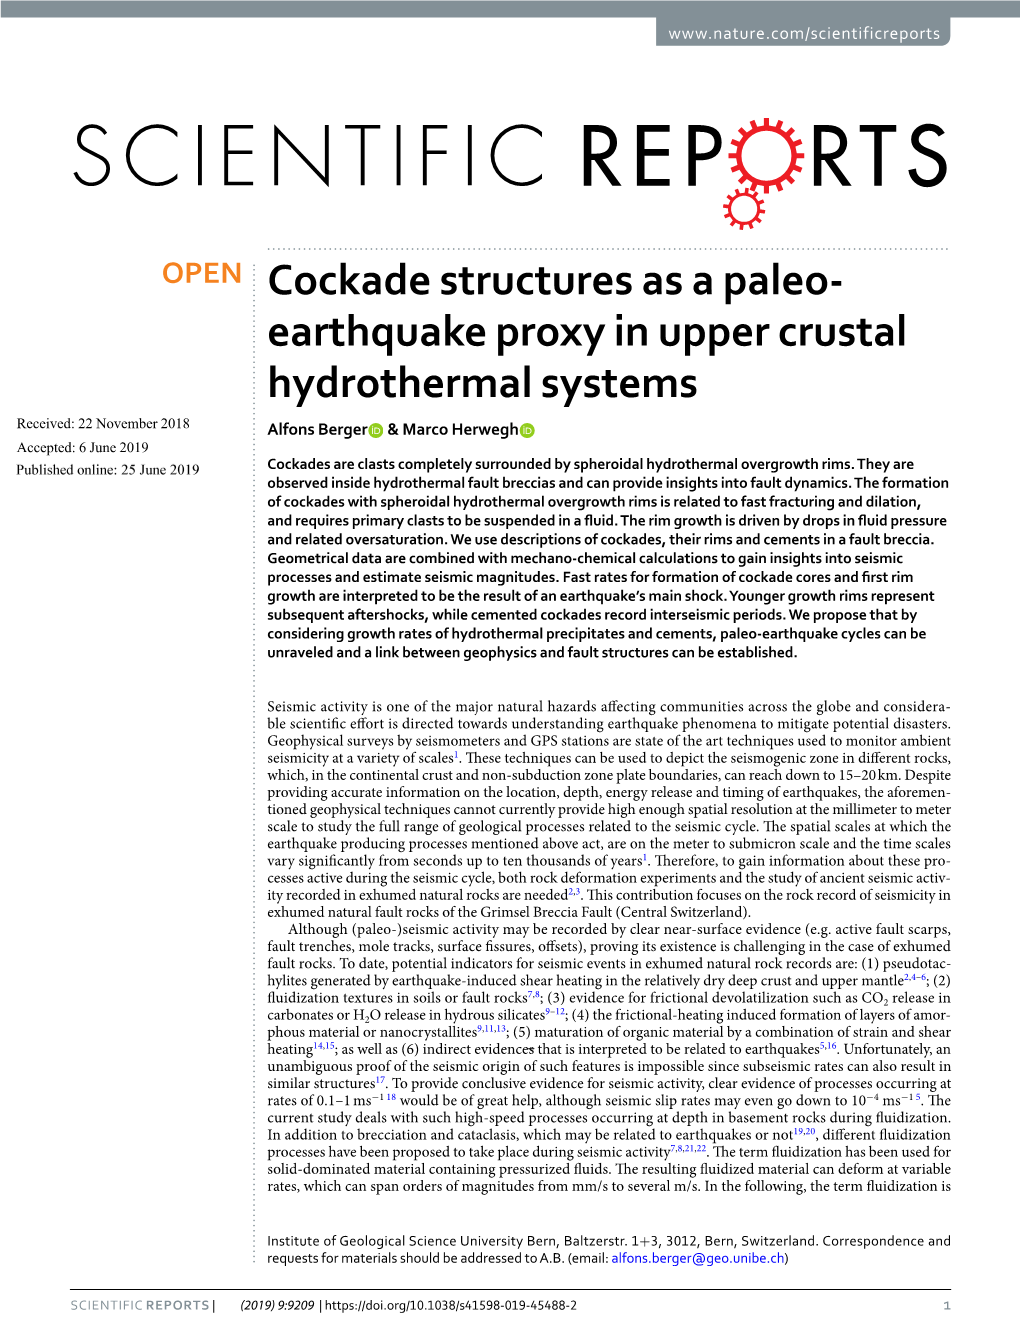 Cockade Structures As a Paleo-Earthquake Proxy in Upper Crustal Hydrothermal Systems